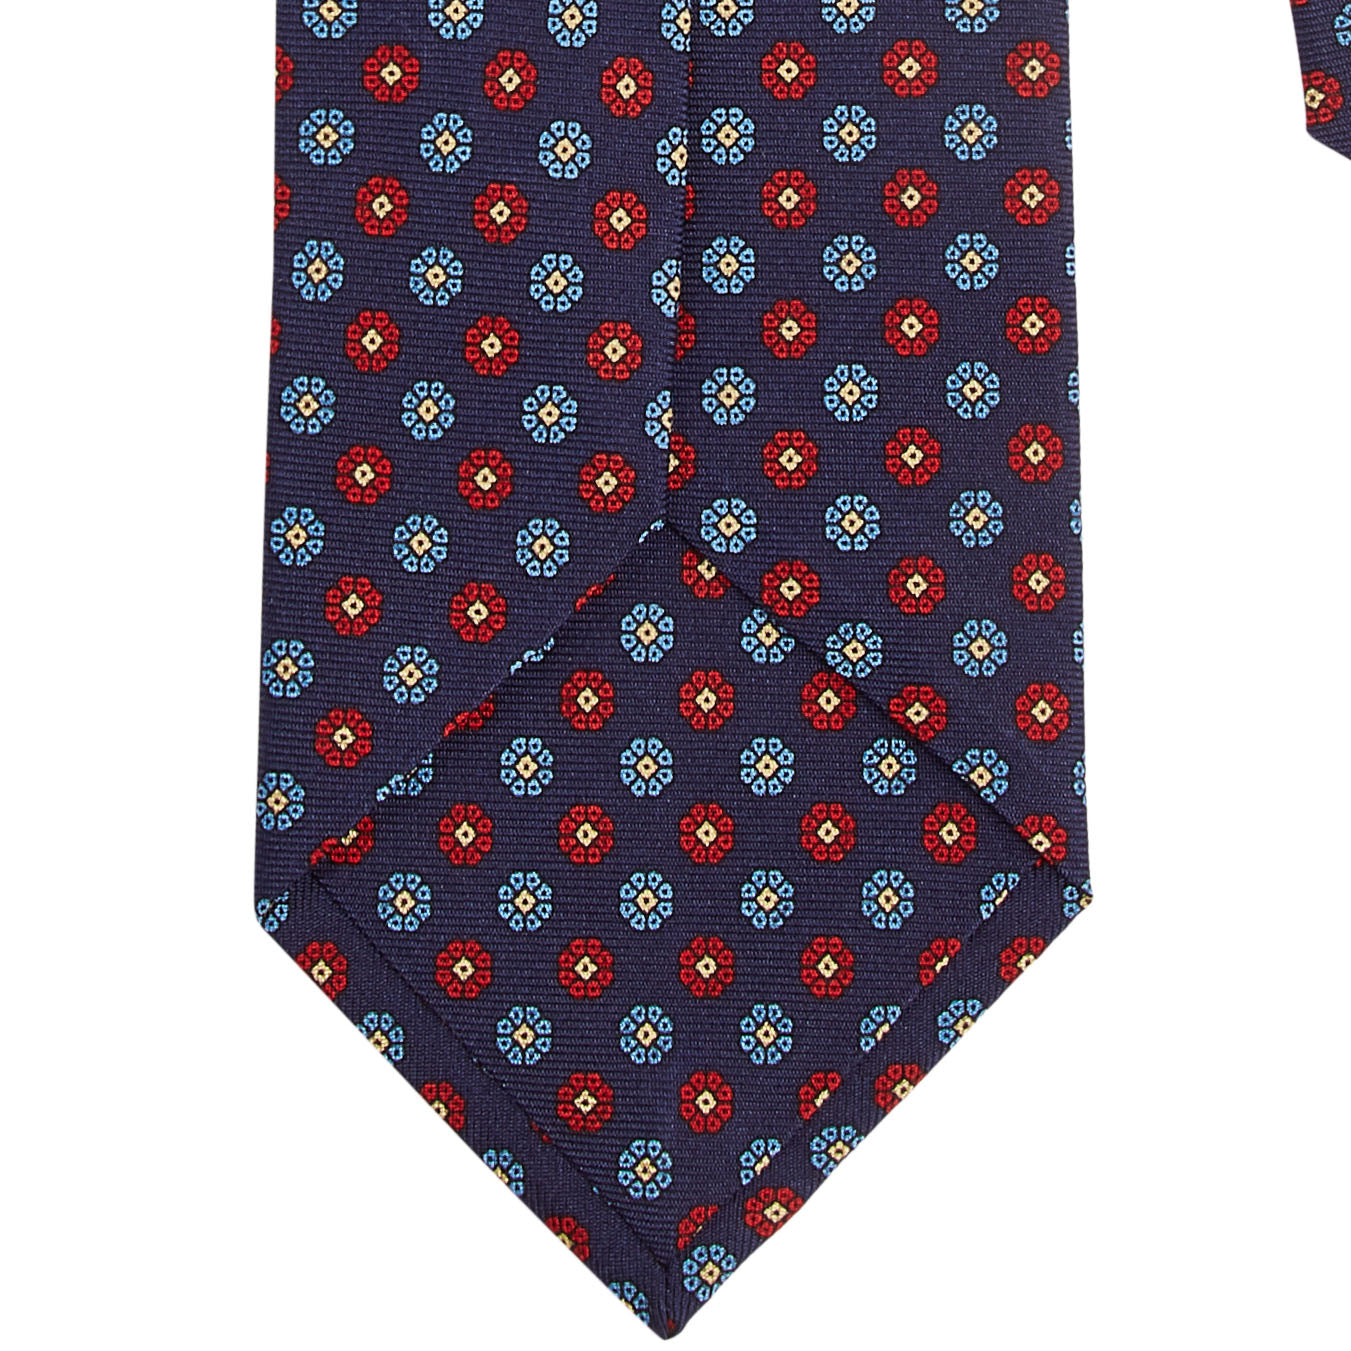 A Sovereign Grade Macclesfield Corn Floral Motif tie by KirbyAllison.com showcasing quality with blue flowers on a red background.